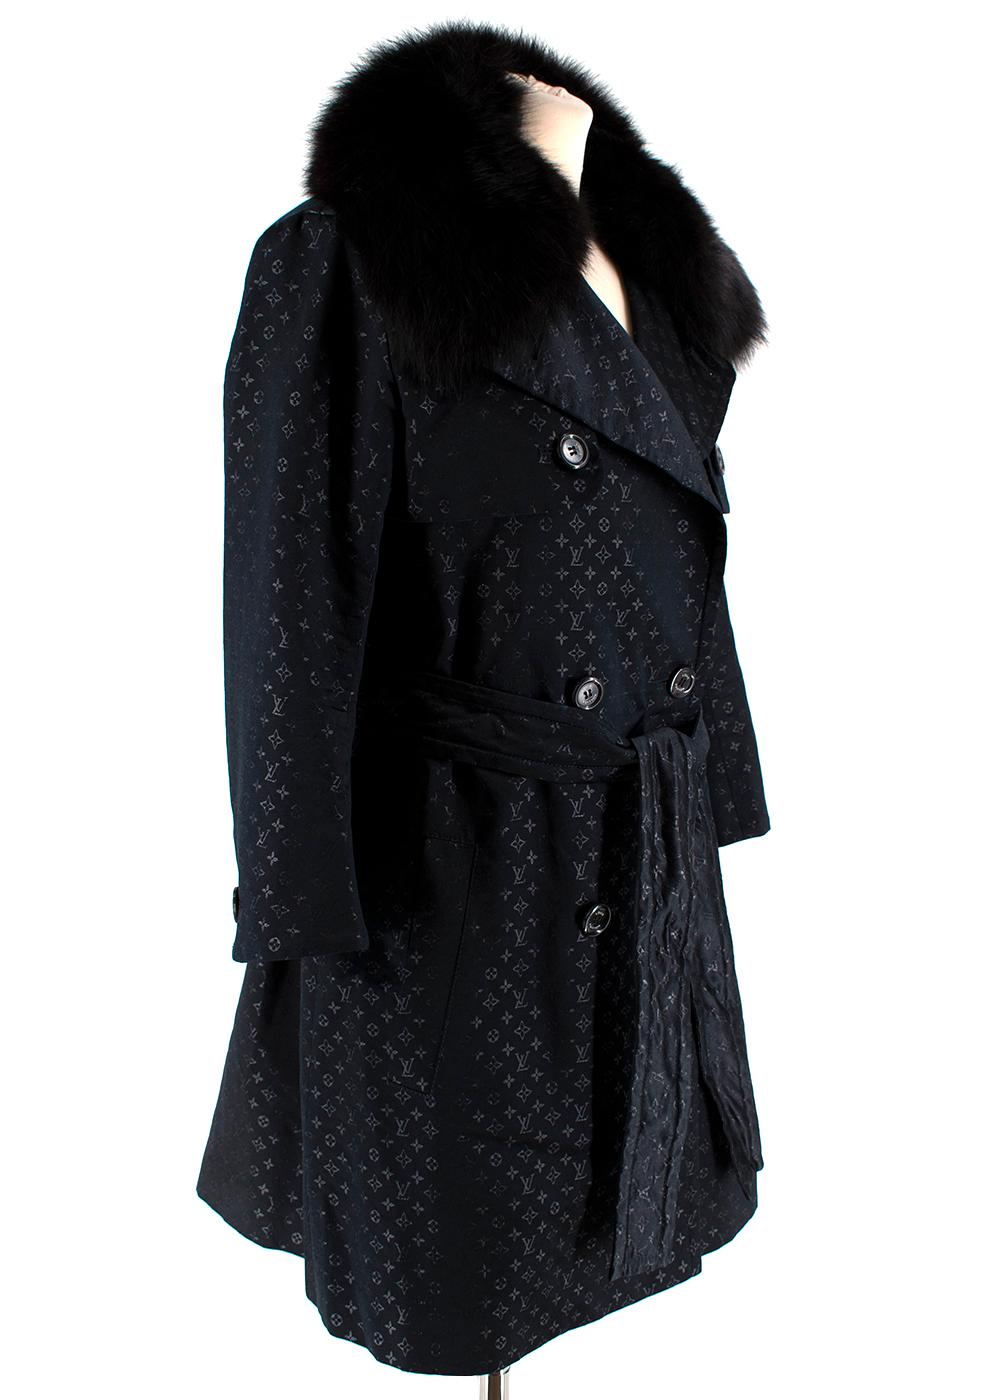 Louis Vuitton Monogram Trench Coat

- Detachable Fox Fur on the collar 
- Monogram weave in black with metallic sheer
- Tortoise shell buttons with Louis Vuitton embossment
- Belted at the waist
- Slit side pockets
- Trans-seasonal style coat & can